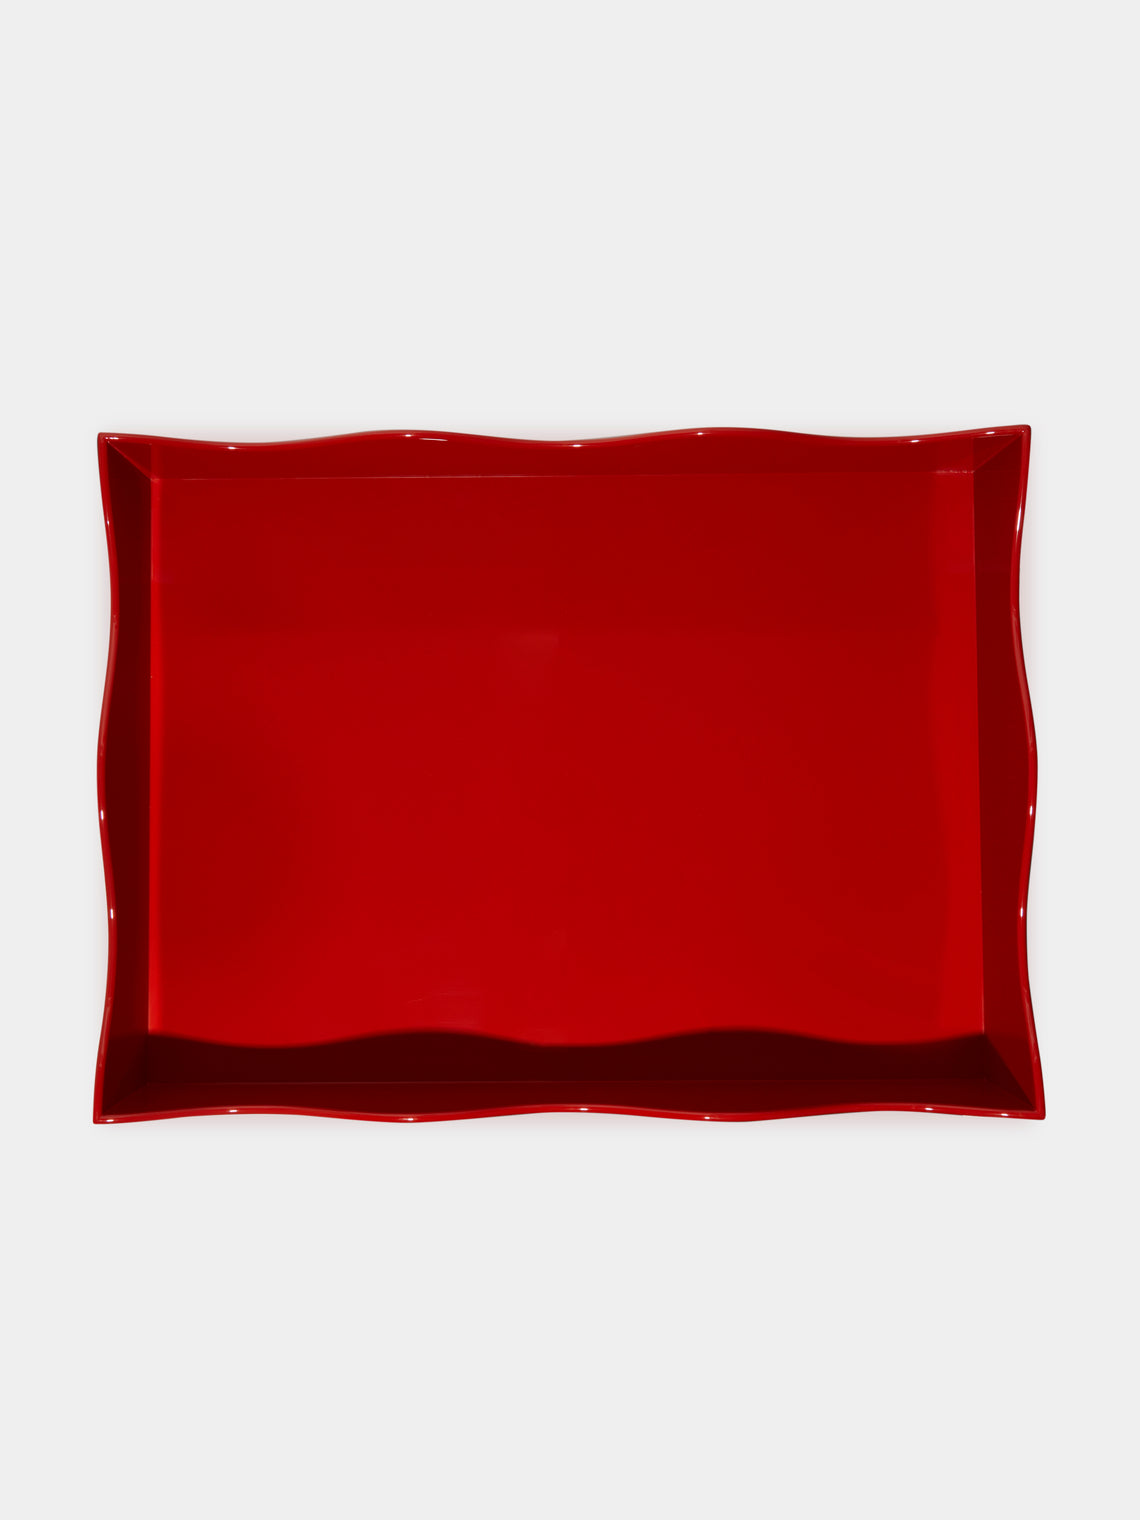 The Lacquer Company - Belles Rives Lacquered Large Tray - Red - ABASK - 